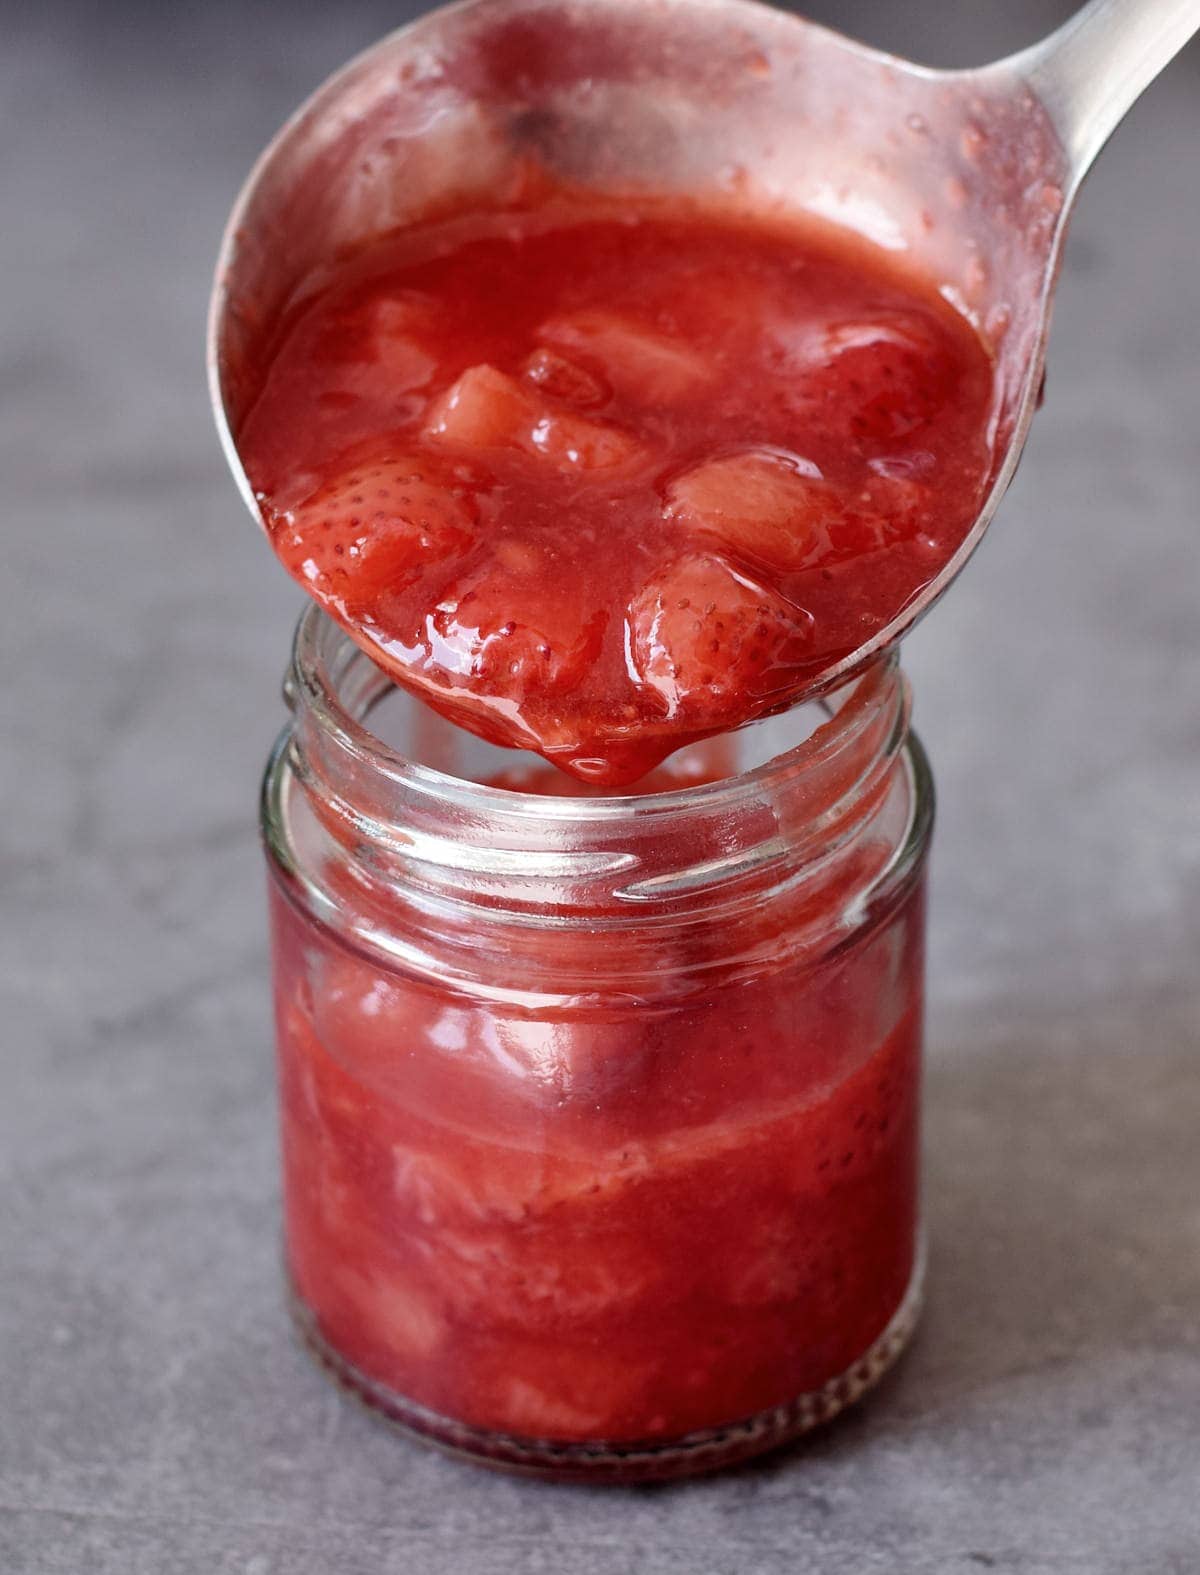 Ladle fills strawberry compote into a glass jar